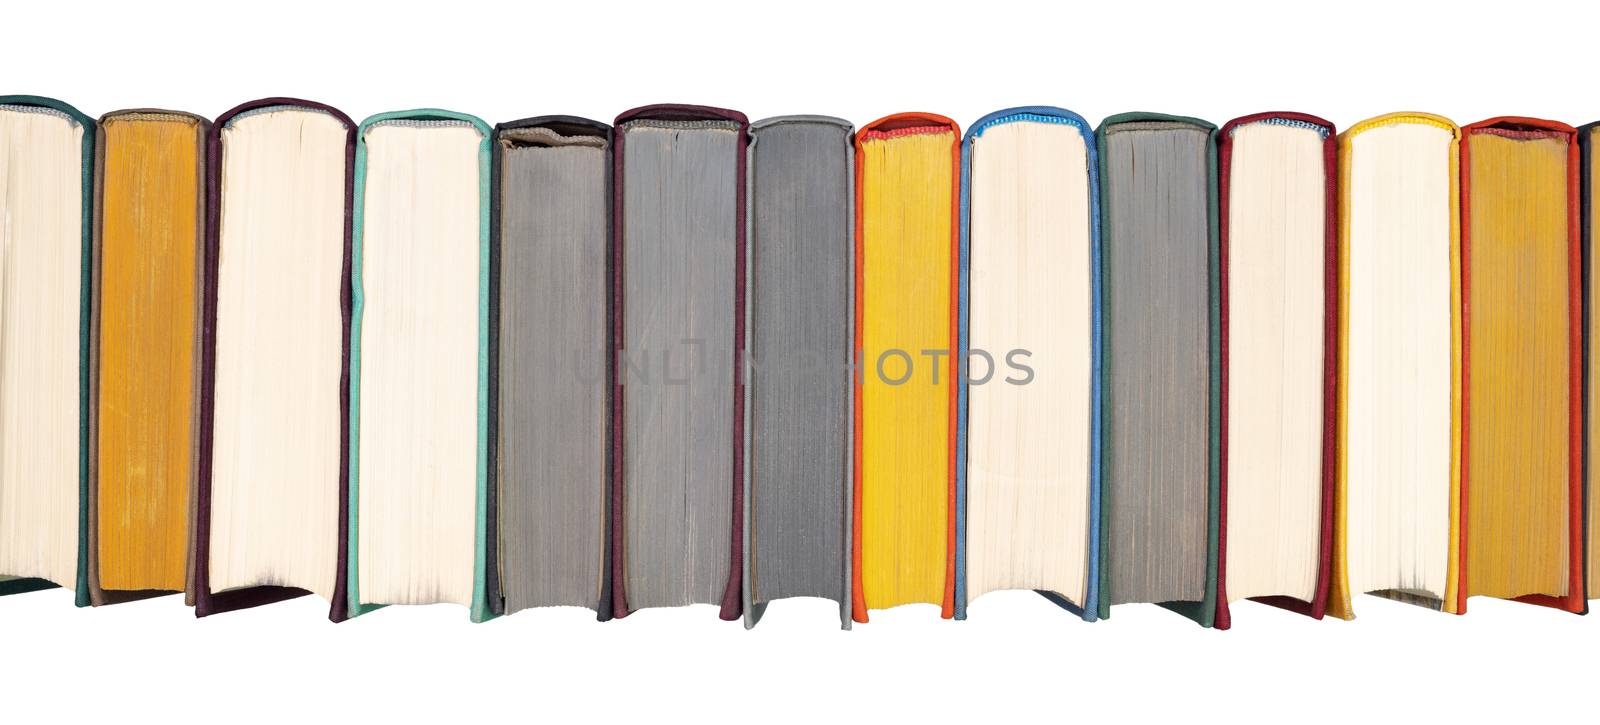 Stack of hardcover books on bookshelf. Close-up view of multicolored vintage hardback books isolated on white background. Flat lay headline panorama banner.